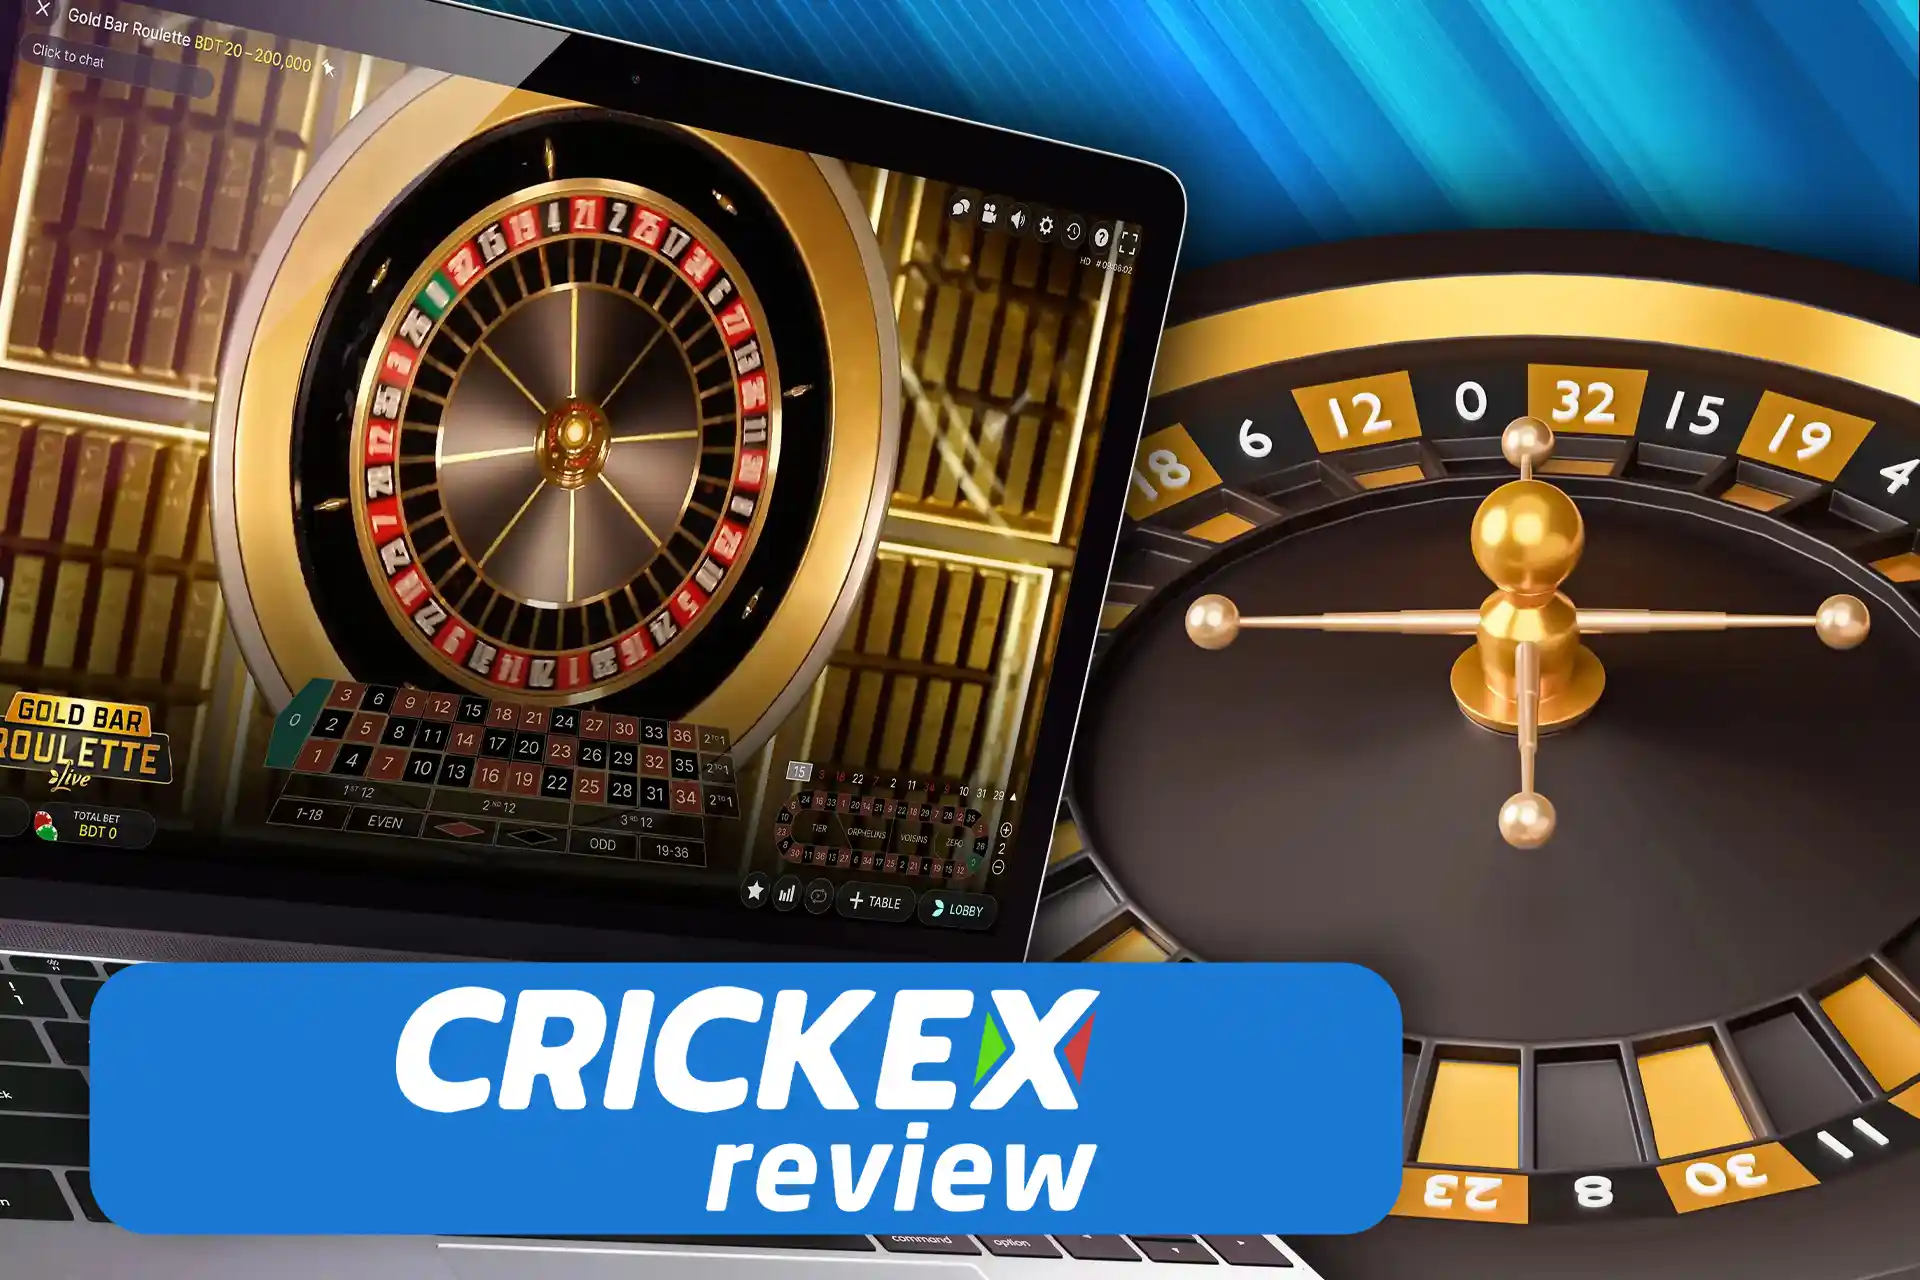 Roulette is one of the most popular casino games at Crickex.